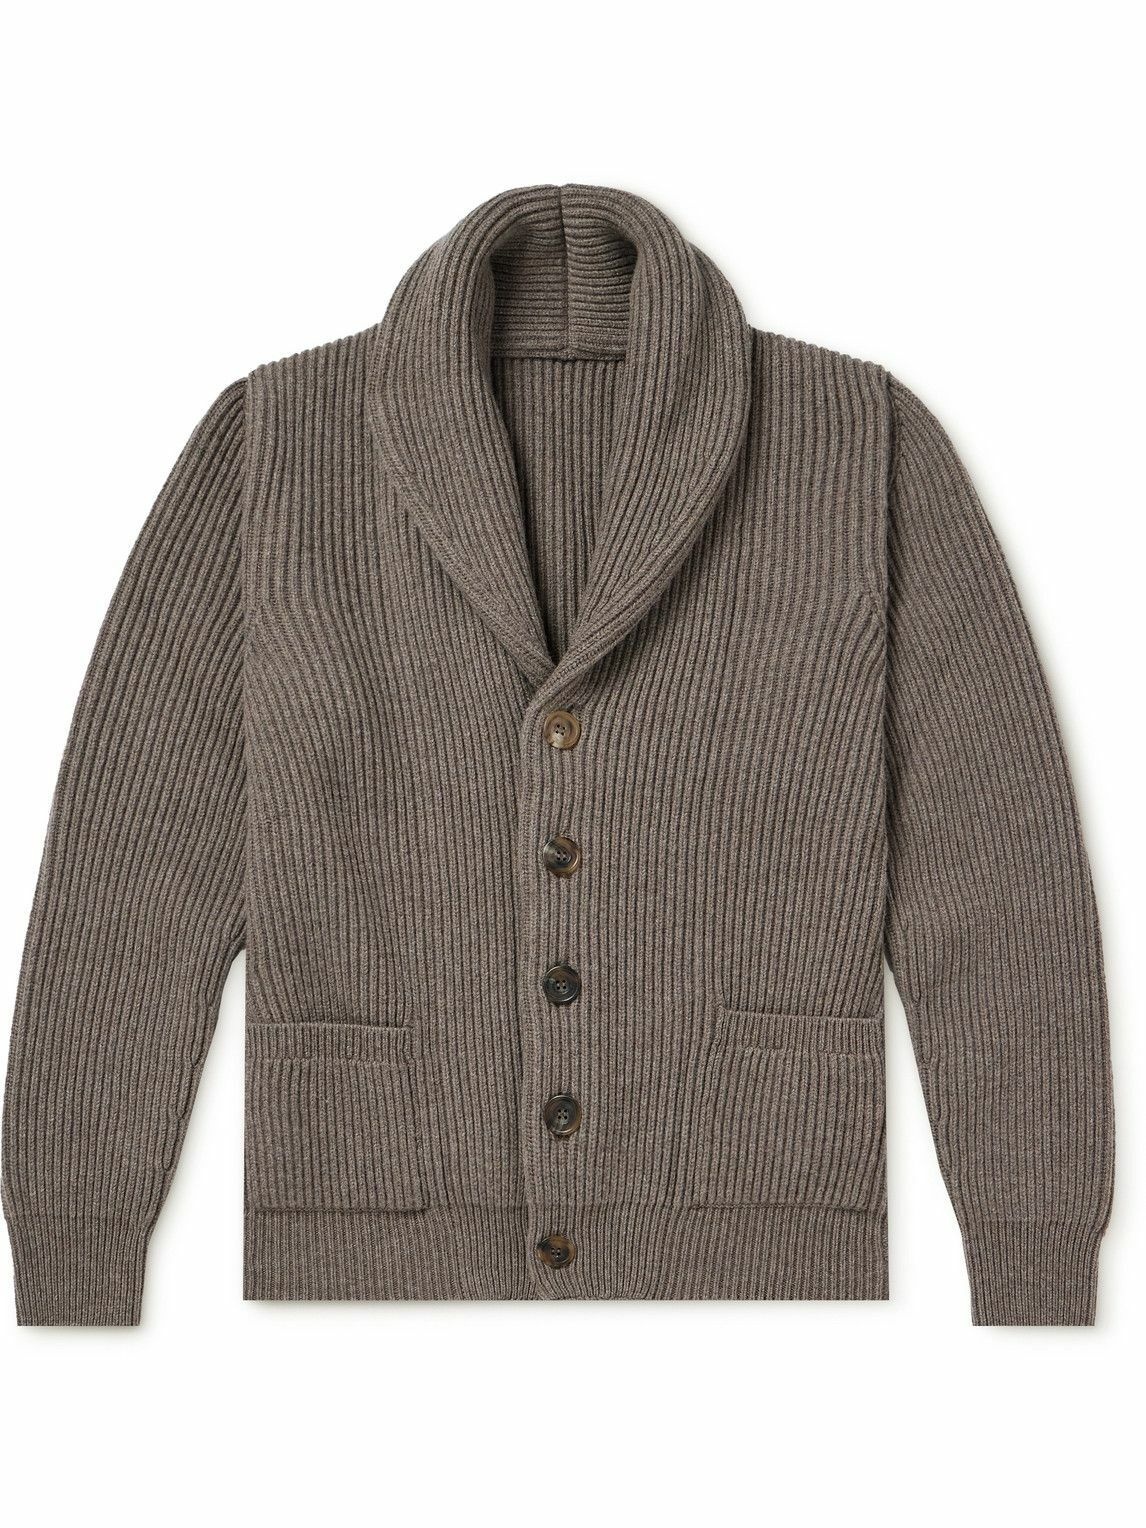 Anderson & Sheppard - Shawl-Collar Ribbed Wool and Cashmere-Blend ...